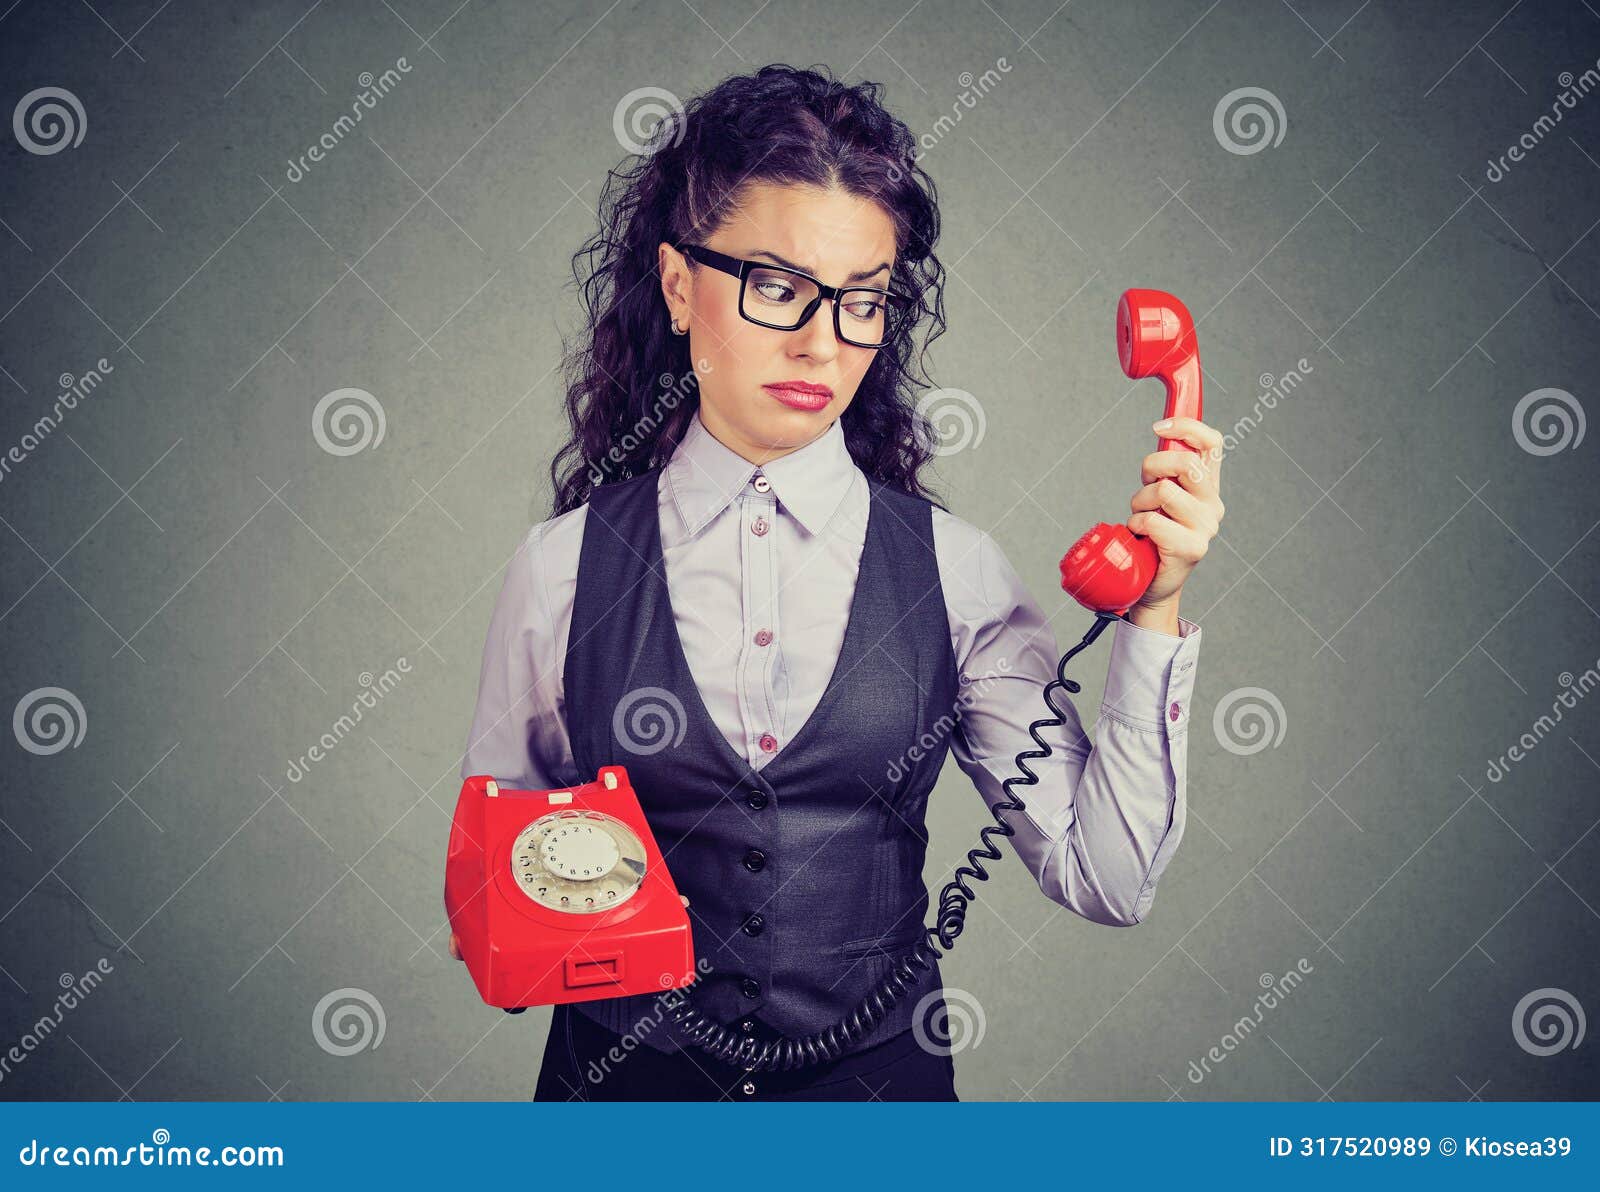 young business woman looking at a red phone with a suspicious expression